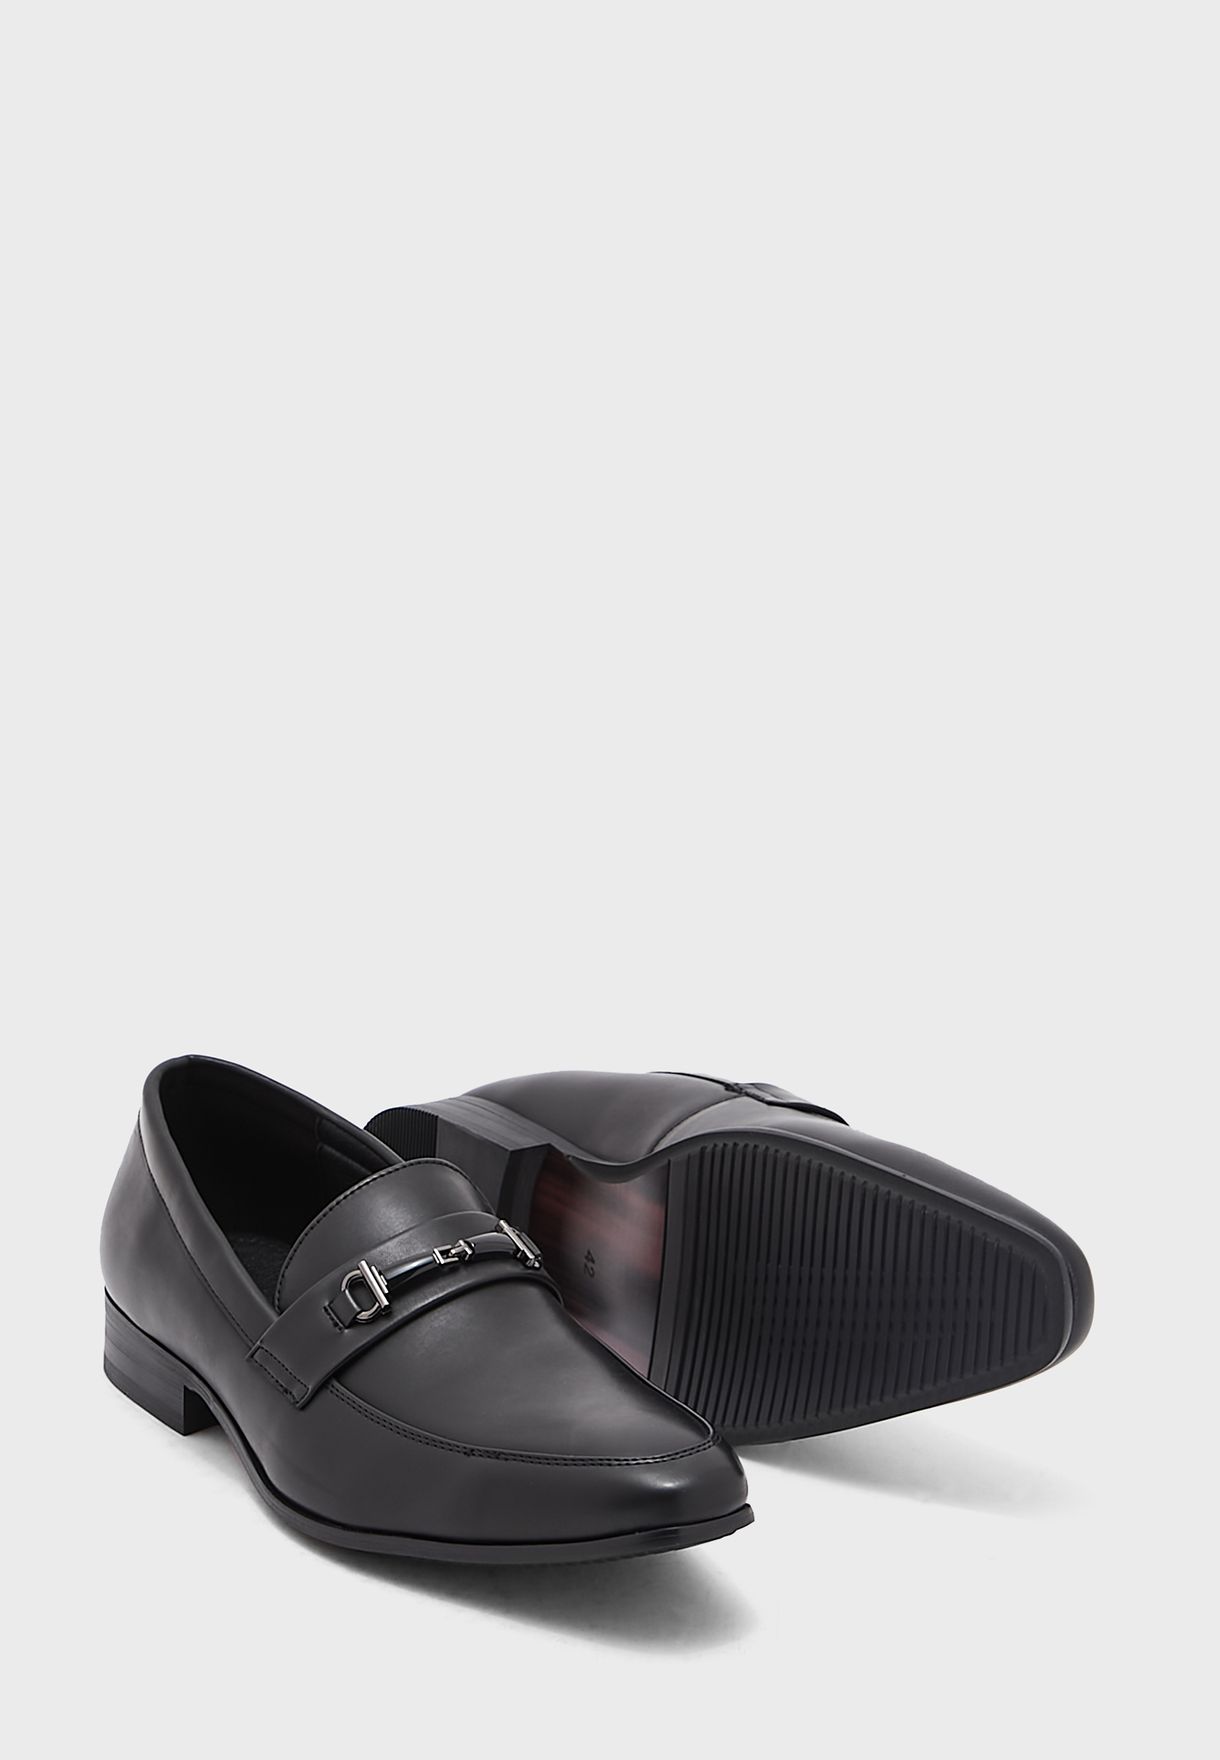 Classic Saddle With Metal Trim Formal Slip Ons